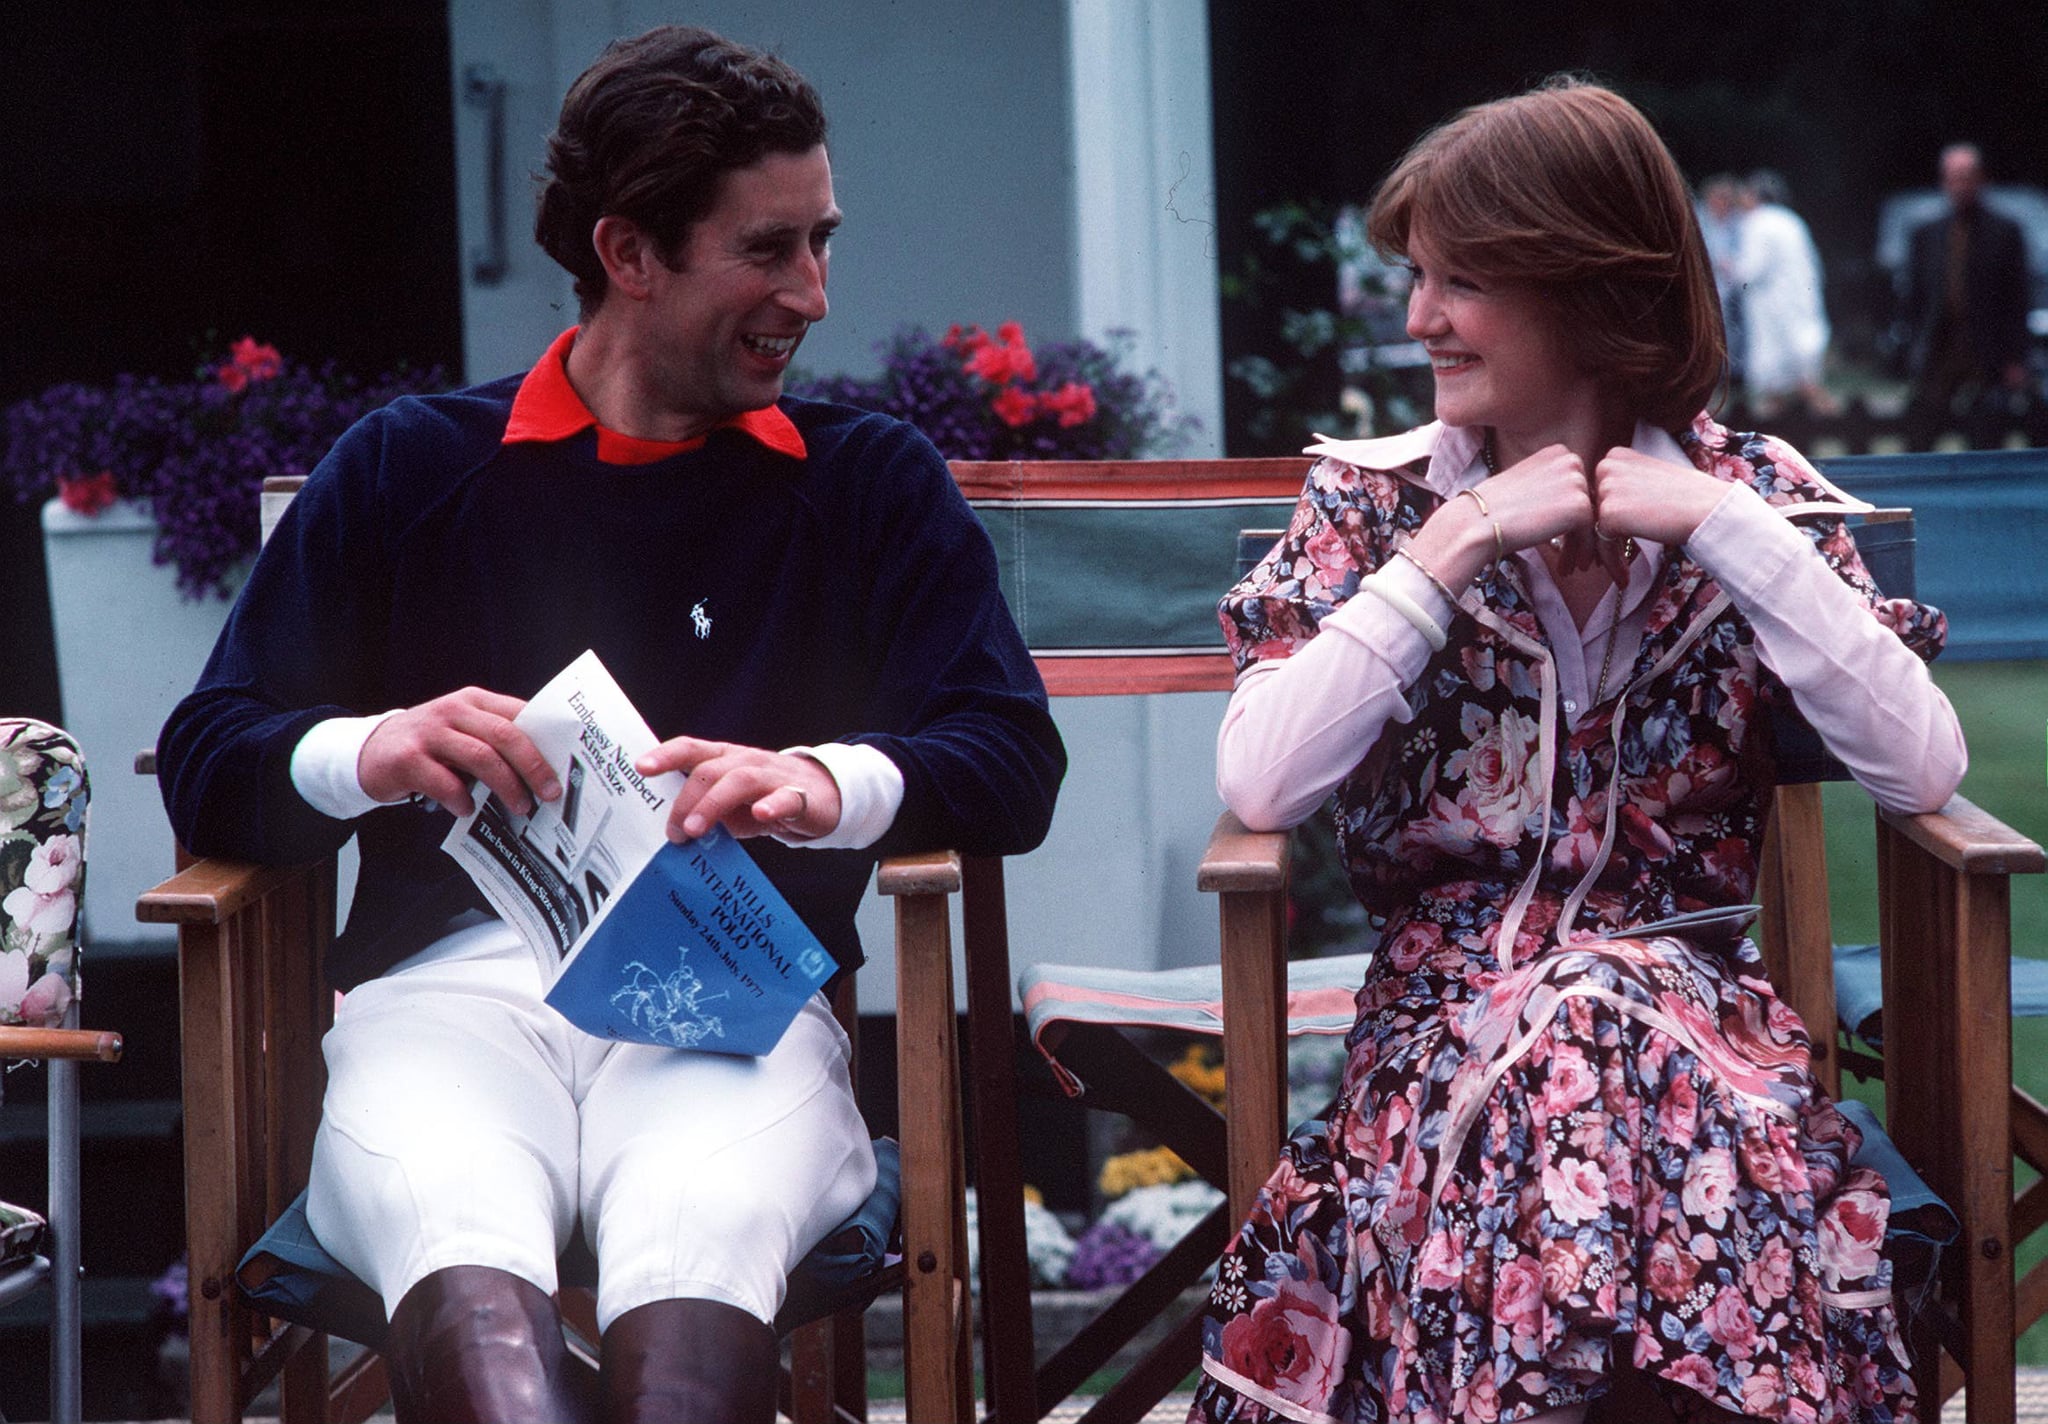 WINDSOR, UNITED KINGDOM - JULY 01:  Prince Charles Sitting Talking To Lady Sarah Spencer At A Polo Match At Guards Polo Club,smiths Lawn, Windsor Great Park (exact Date Not Certain)  (Photo by Tim Graham Photo Library via Getty Images)